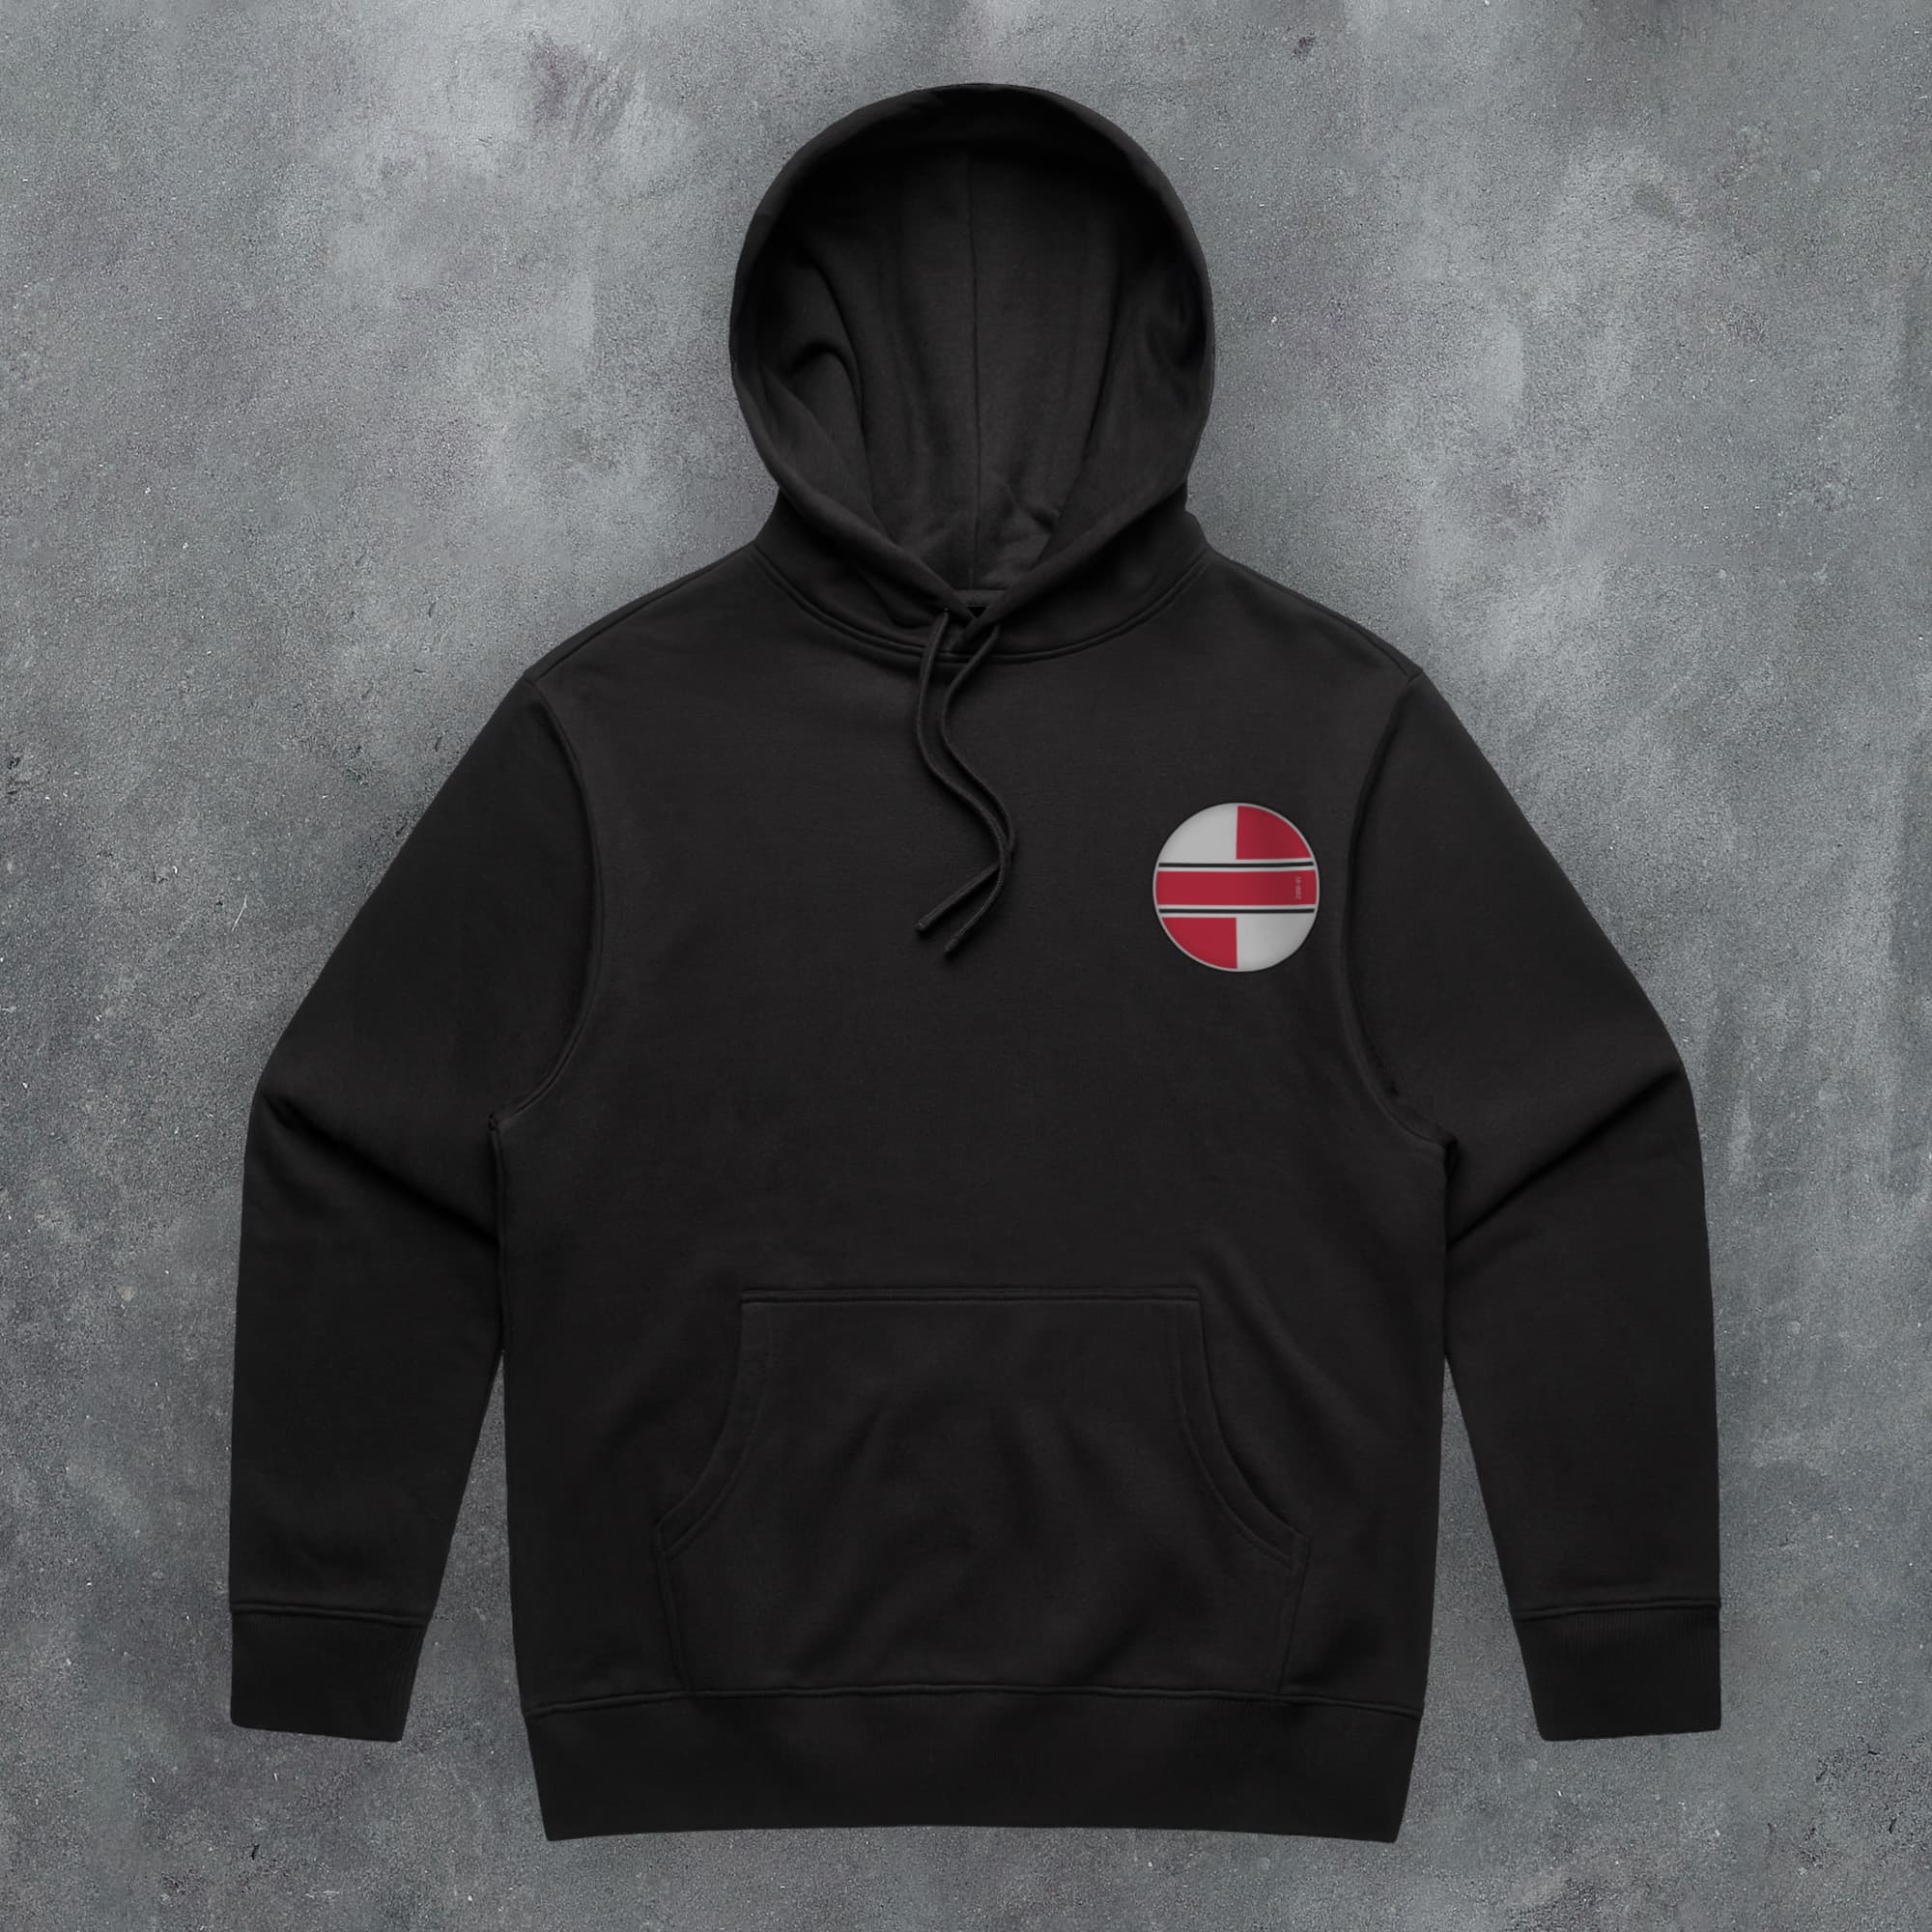 a black hoodie with a red and white cross on it